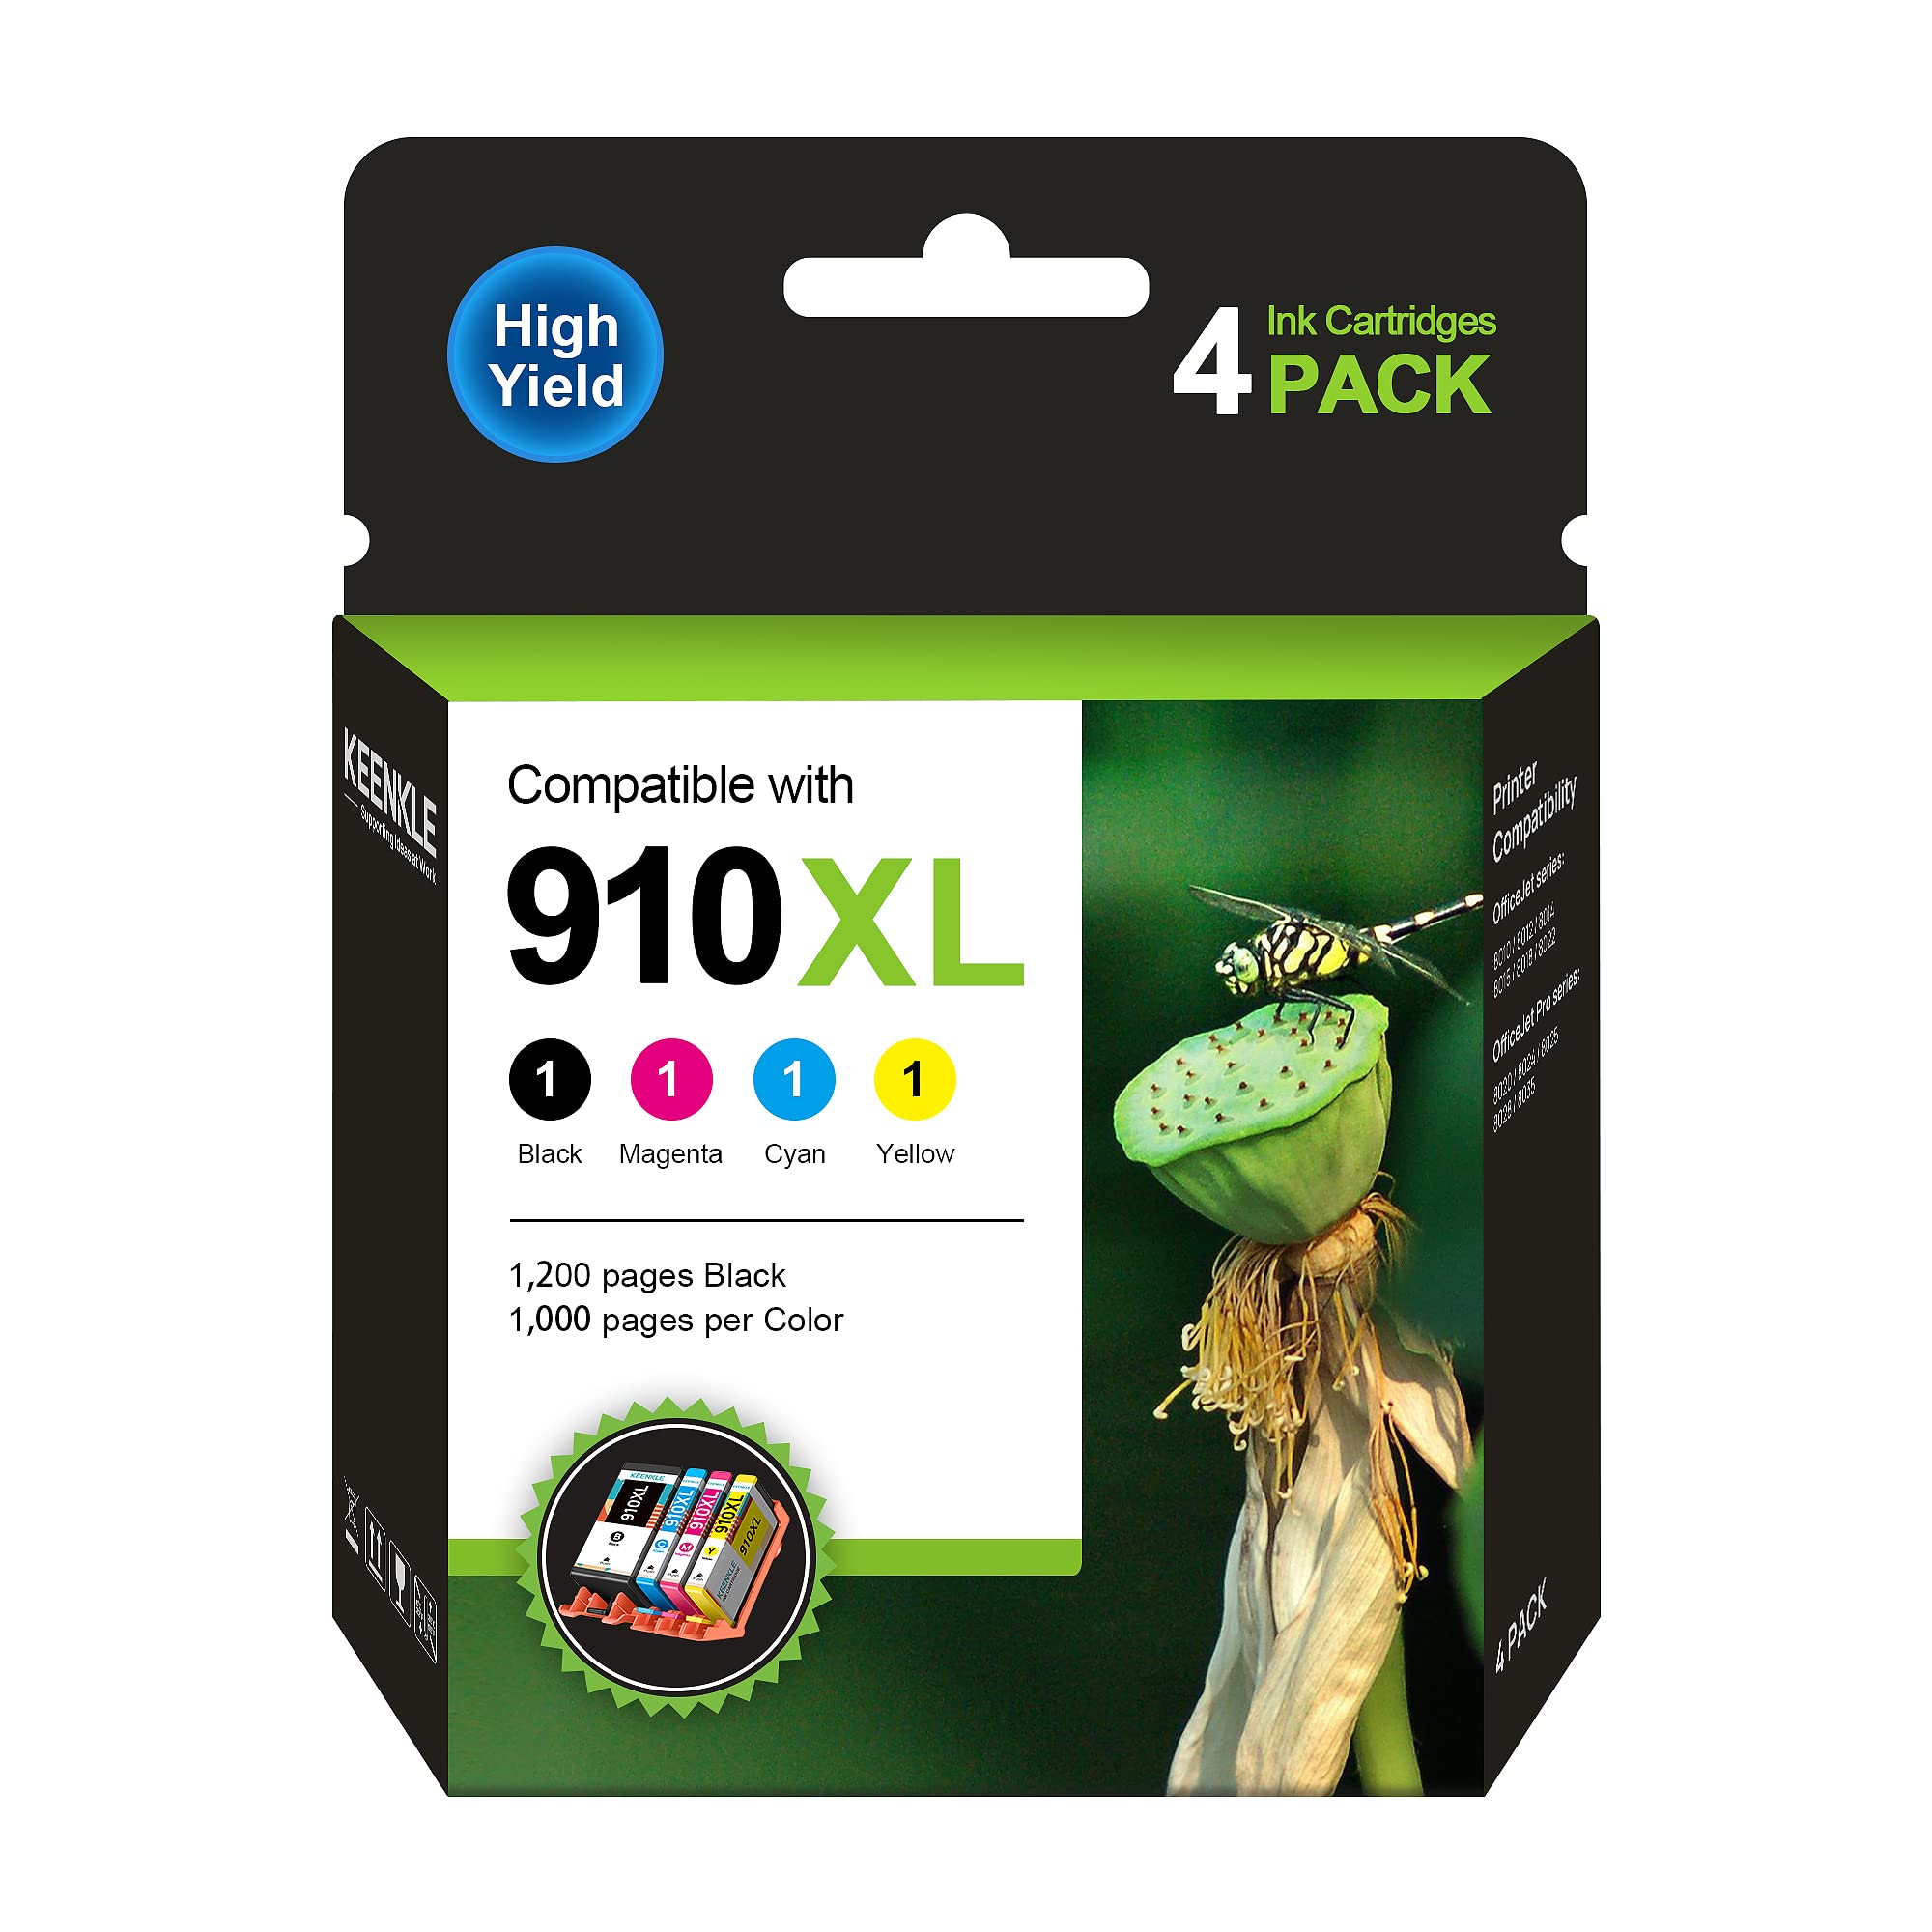 910XL Ink Cartridges (4 Pack) | Compatible with OfficeJet Pro 8020 8025 8035 8028 Series, OfficeJet 8022 Series, Replacement for HP 910XL 910 910 XL Ink cartridges